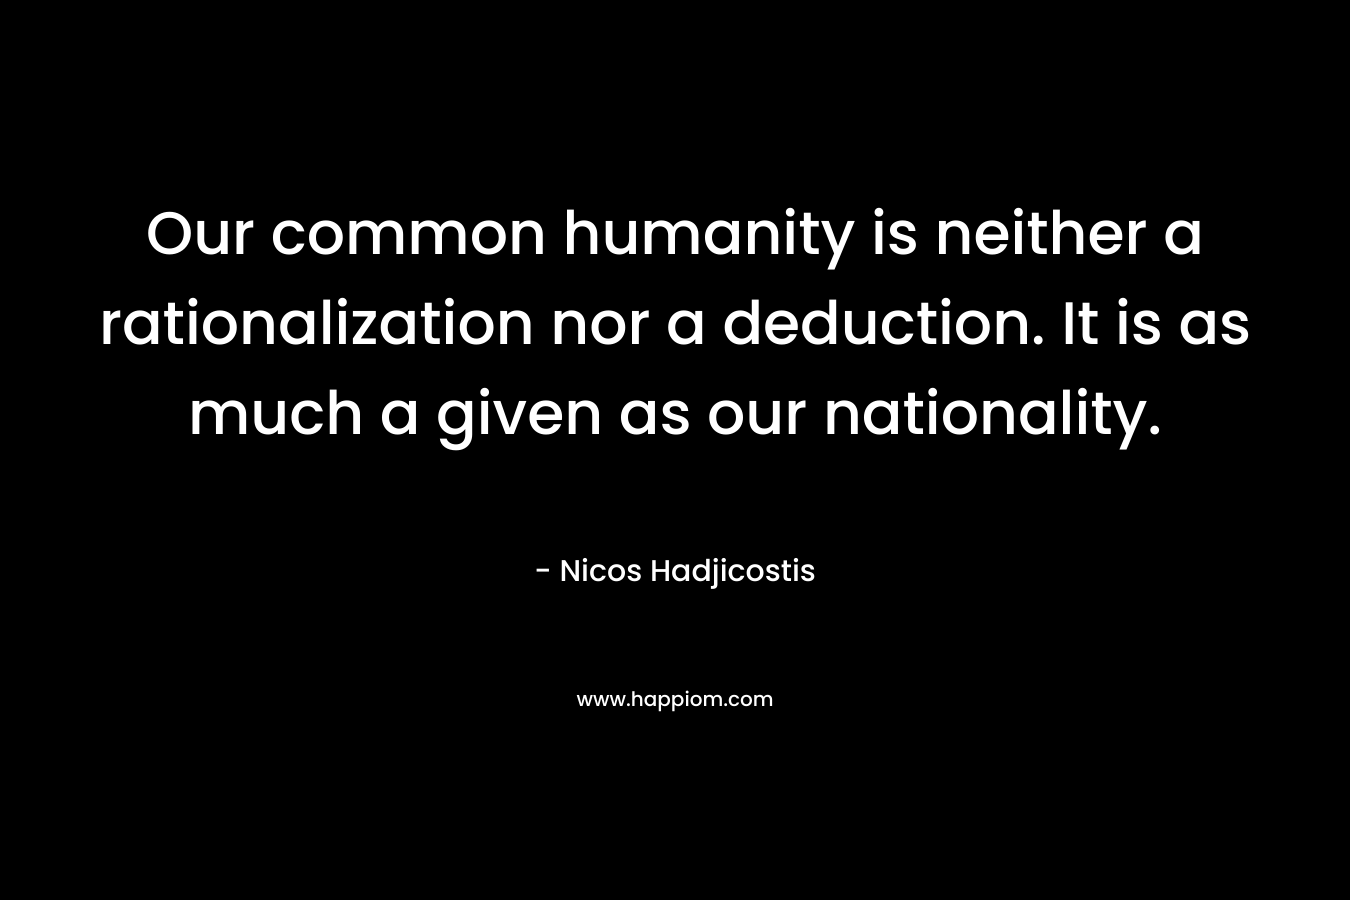 Our common humanity is neither a rationalization nor a deduction. It is as much a given as our nationality.